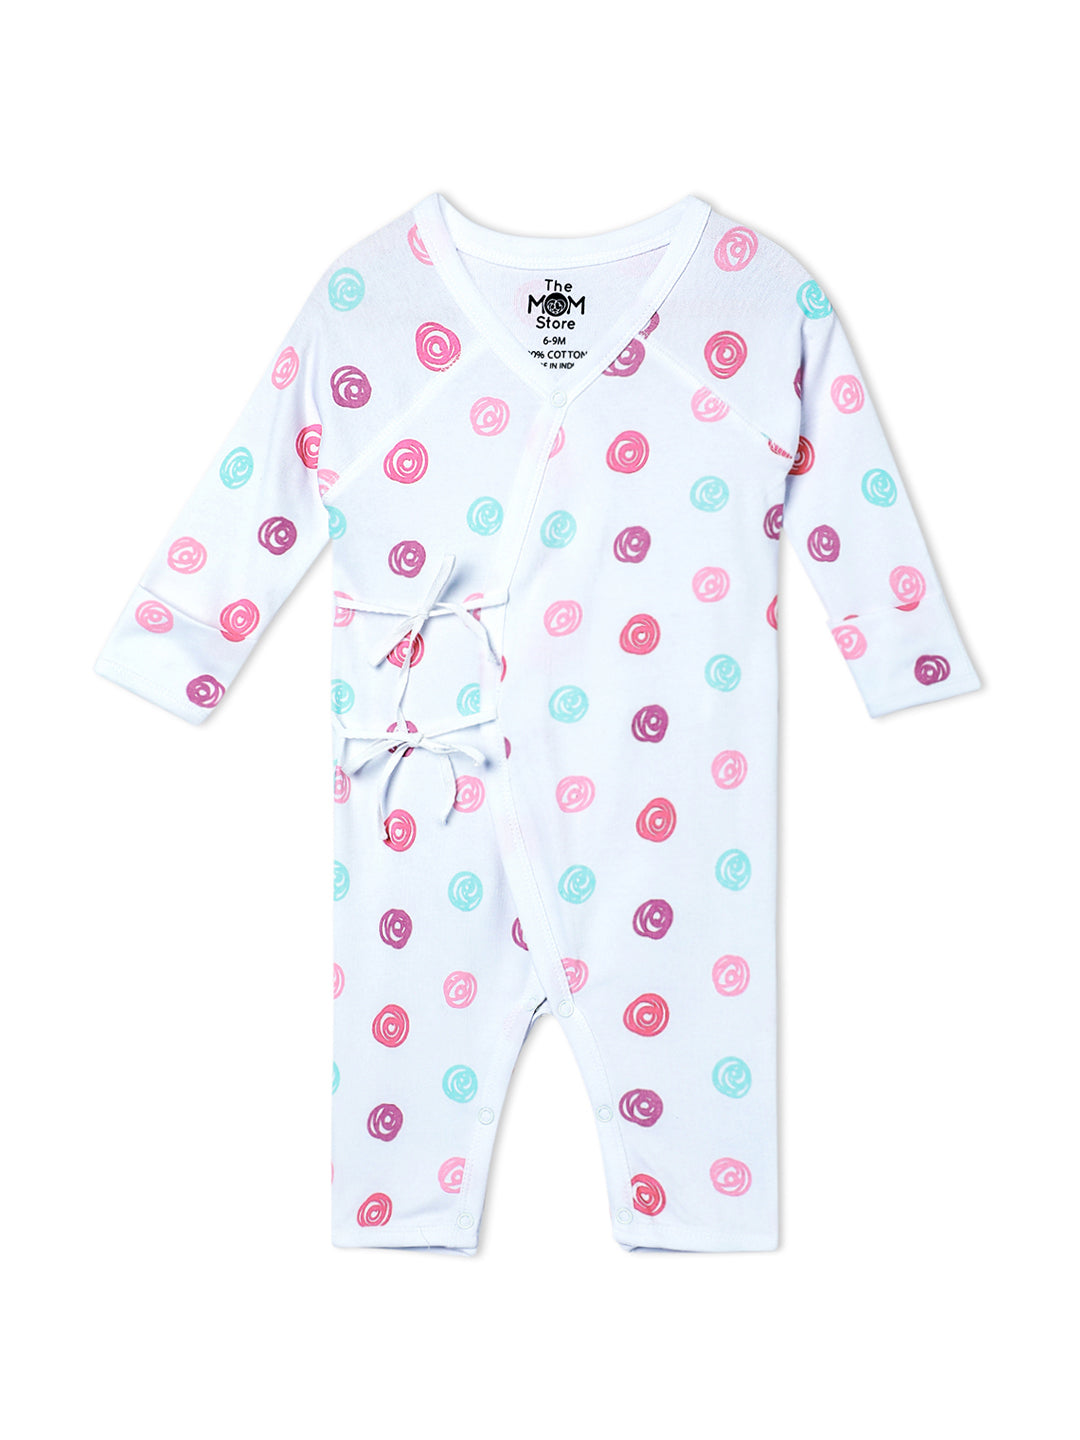 Jabla Infant Romper Combo Of 3: Fresh Slice For The Day-I Pine For You-Roses